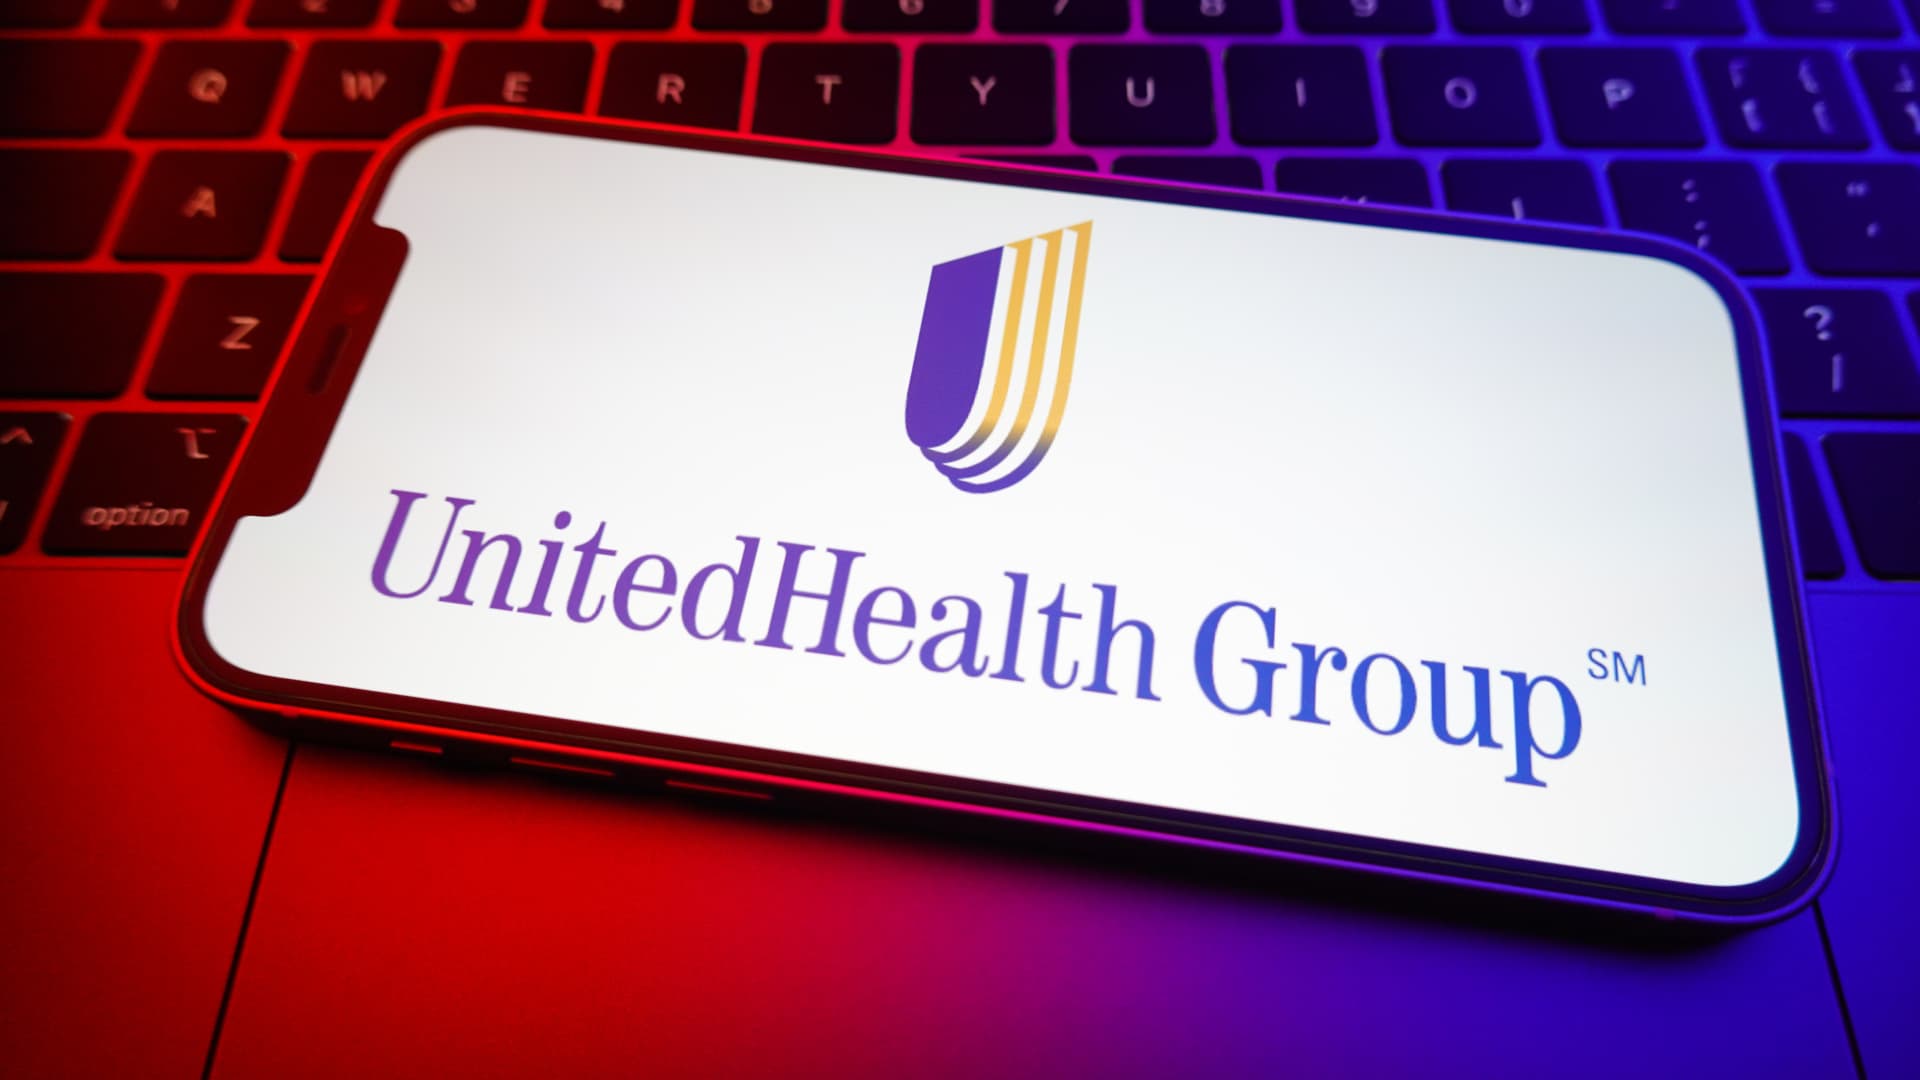 UnitedHealth Employees has paid better than $3 billion to companies following cyberattack